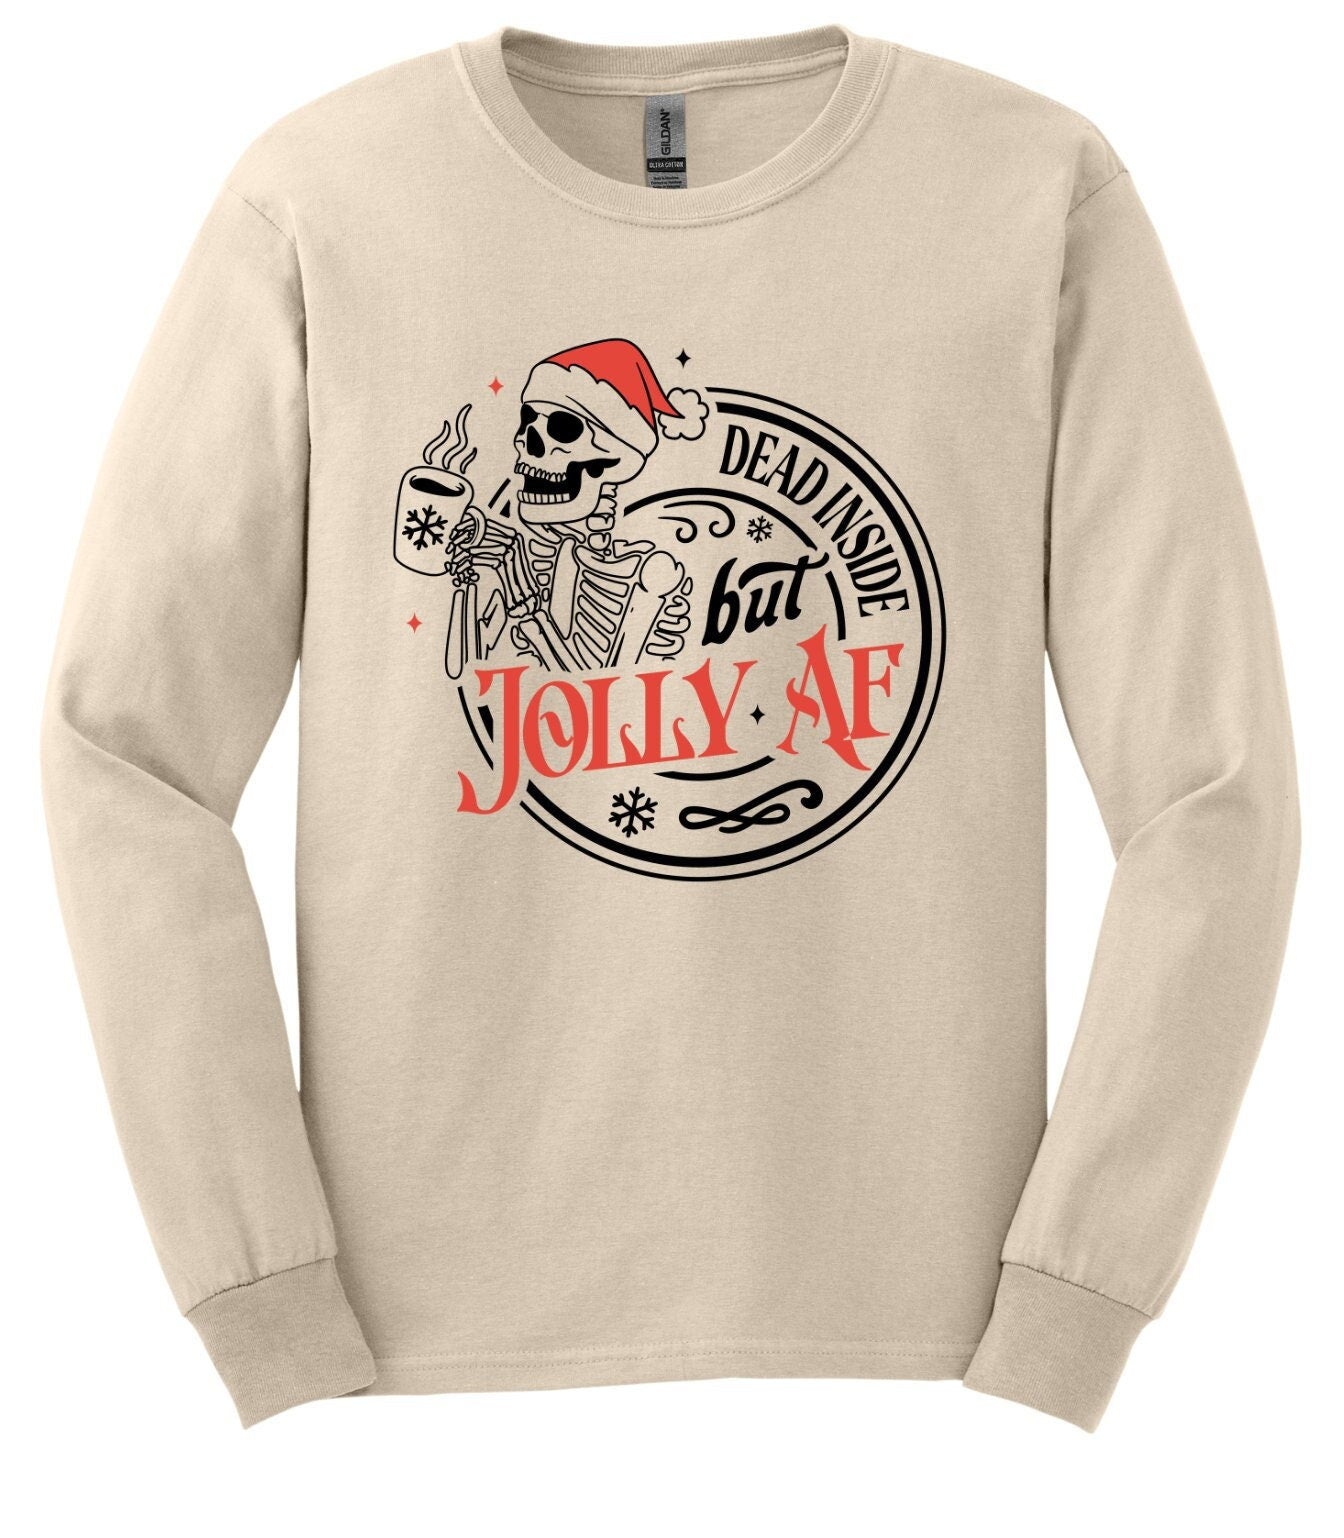 Dead Inside but Jolly AF, Long Sleeve and Short Sleeve Shirt, Cotton, Adult Tee